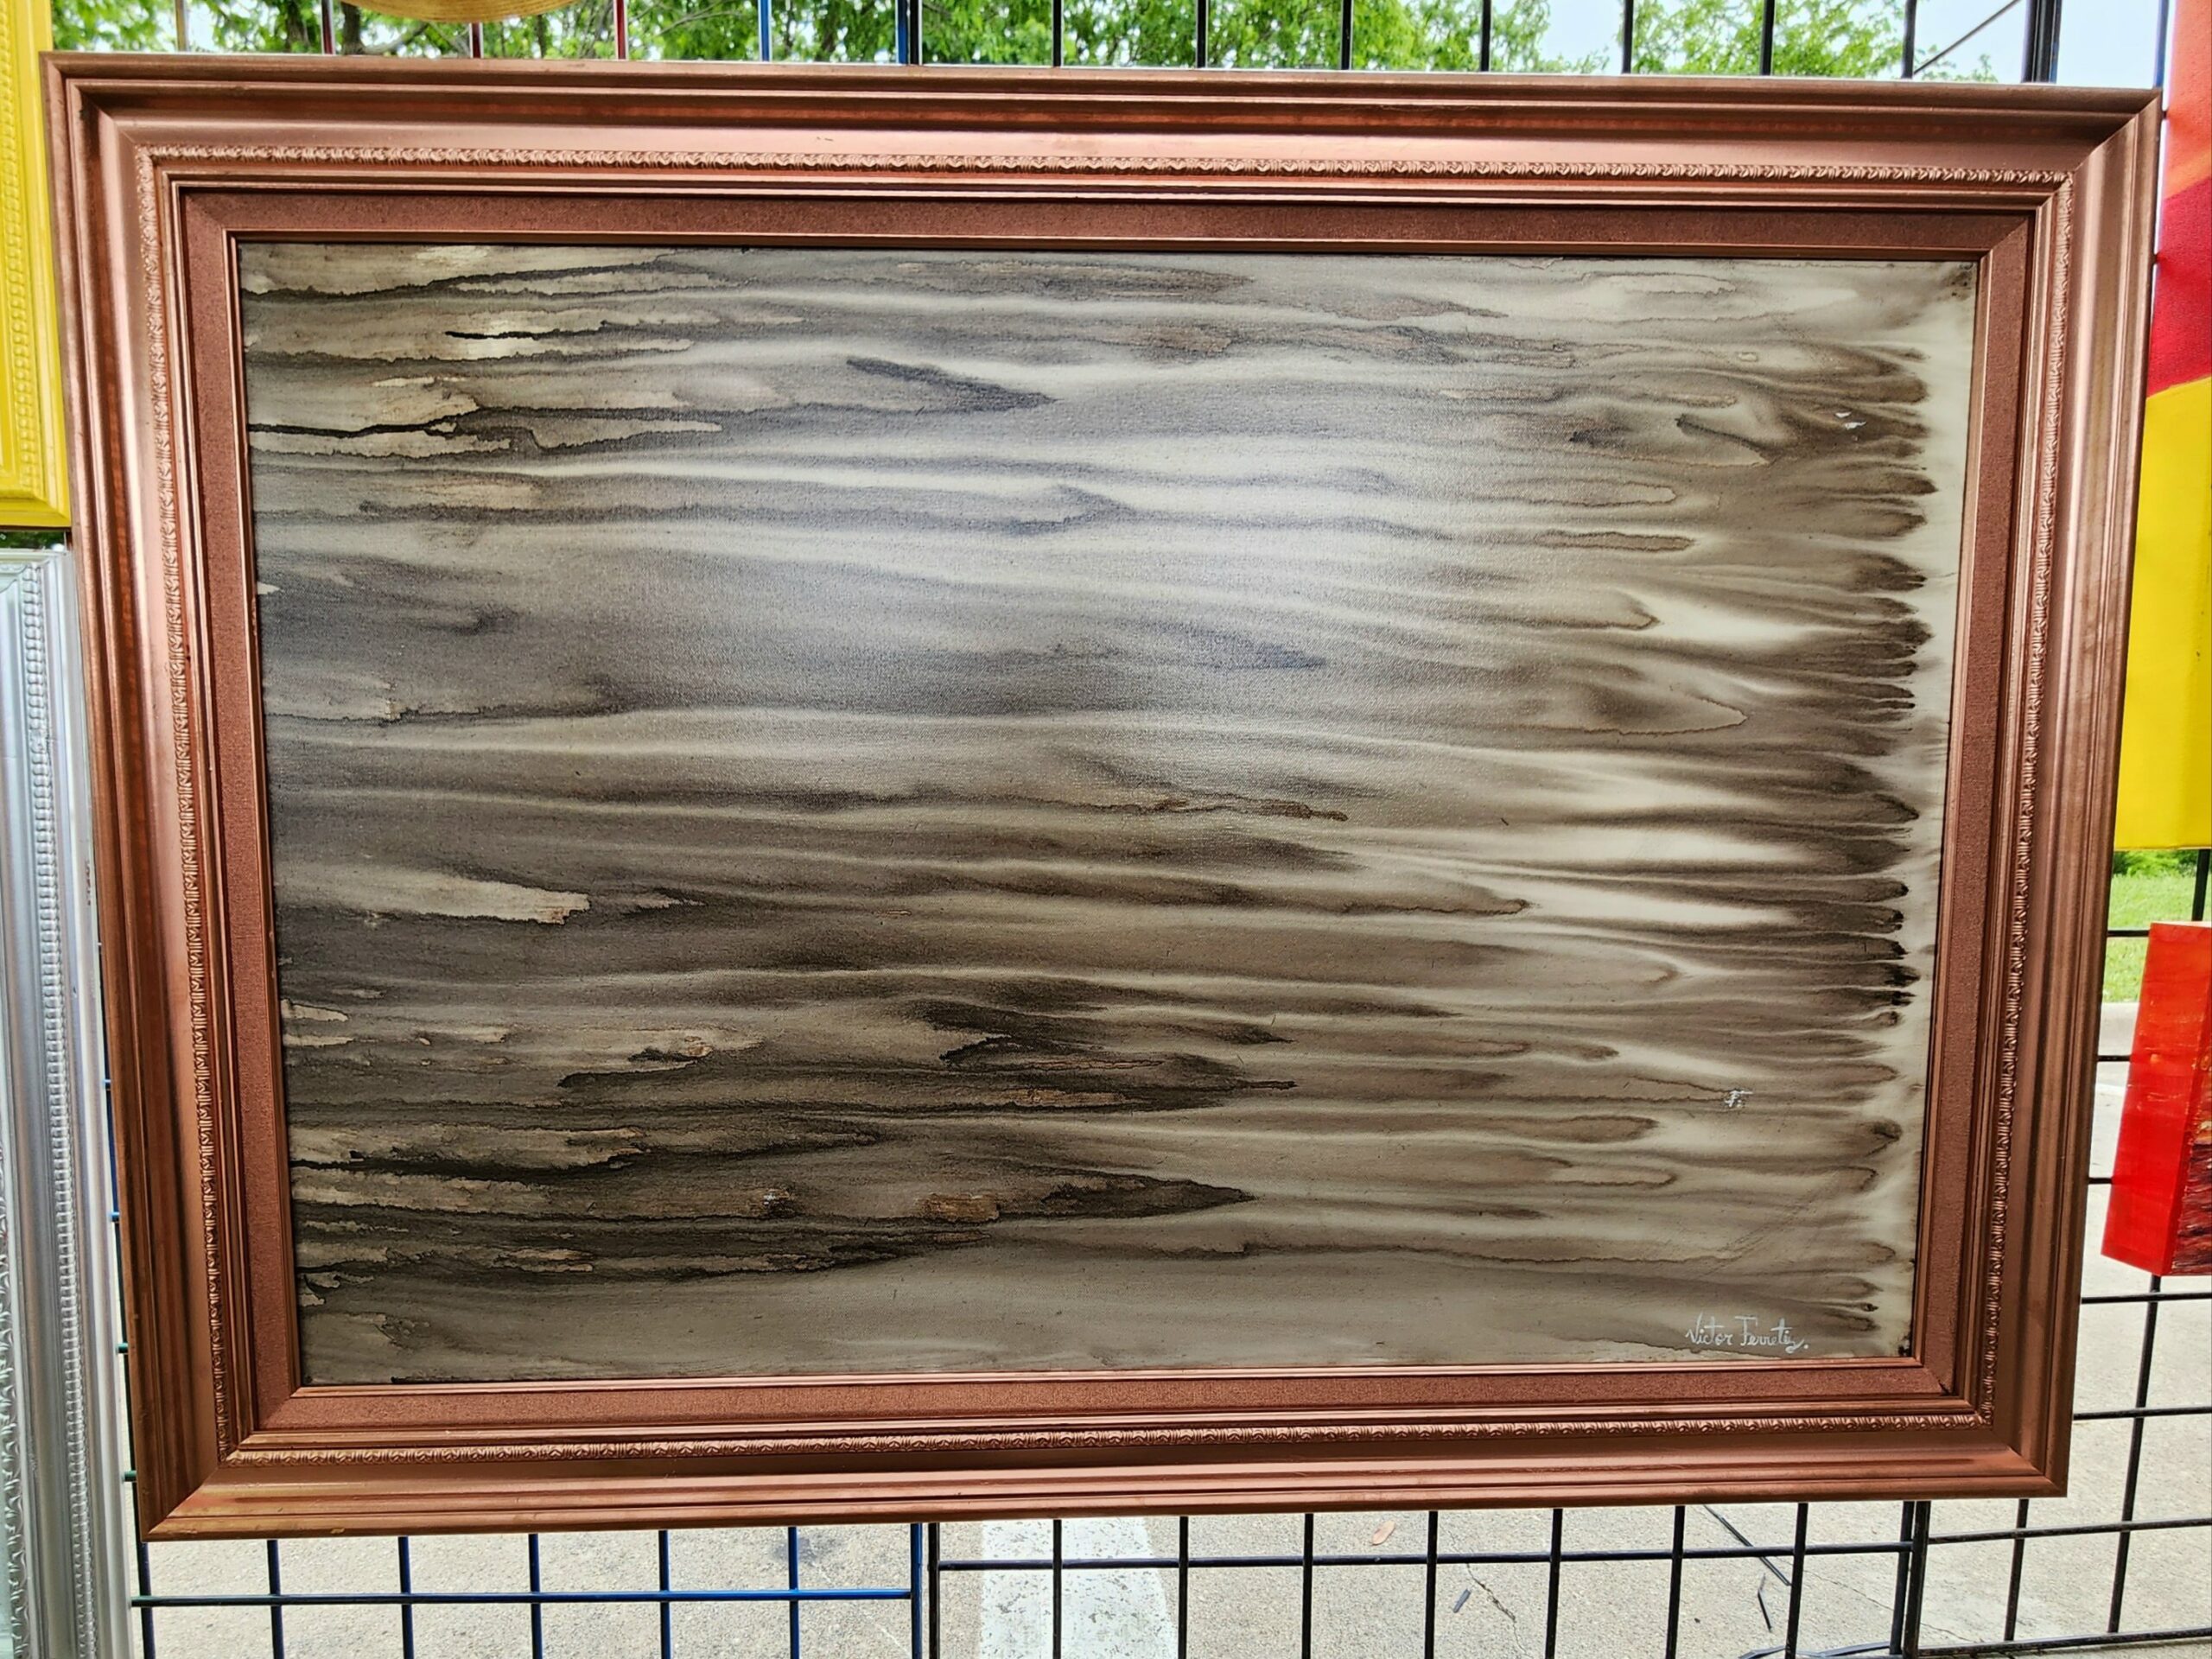 Abstract painting of illusions of brown hues and calming depictions of air, tree bark, and sand at the same time. Painted wooden frame.
Painting size: 24"x36"